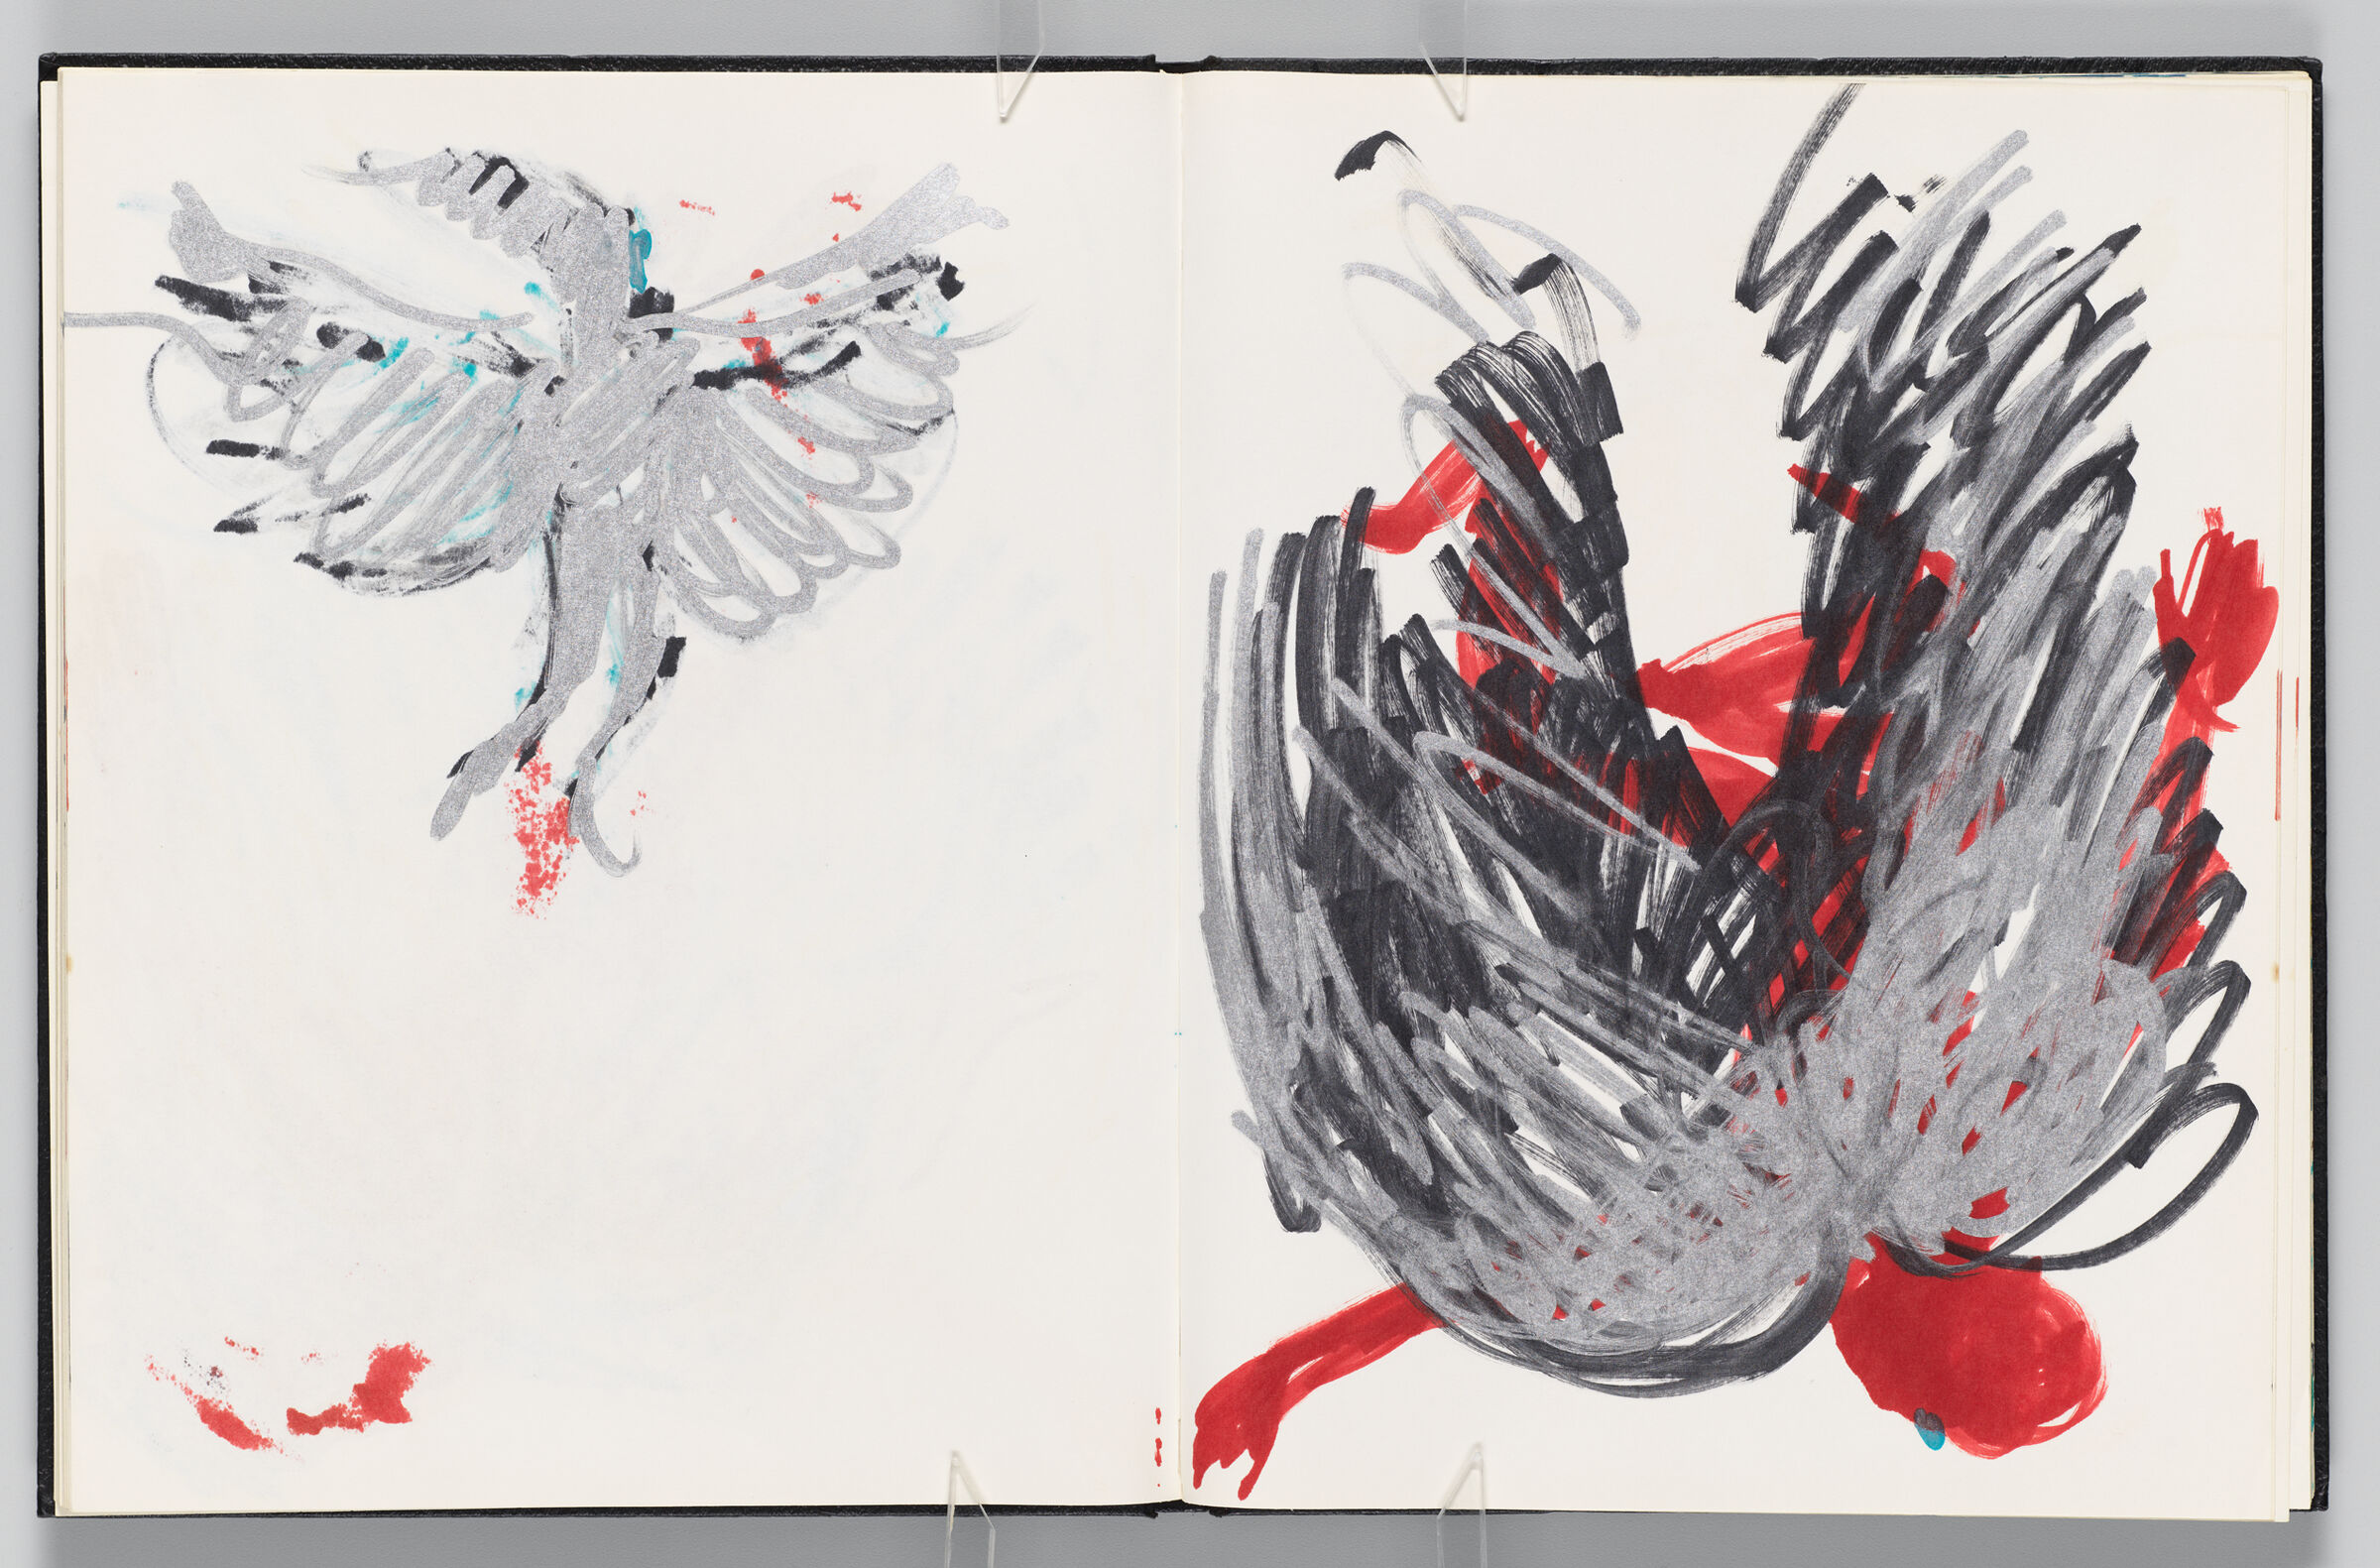 Untitled (Icarus, Left Page); Untitled (Fall Of Icarus, Right Page)